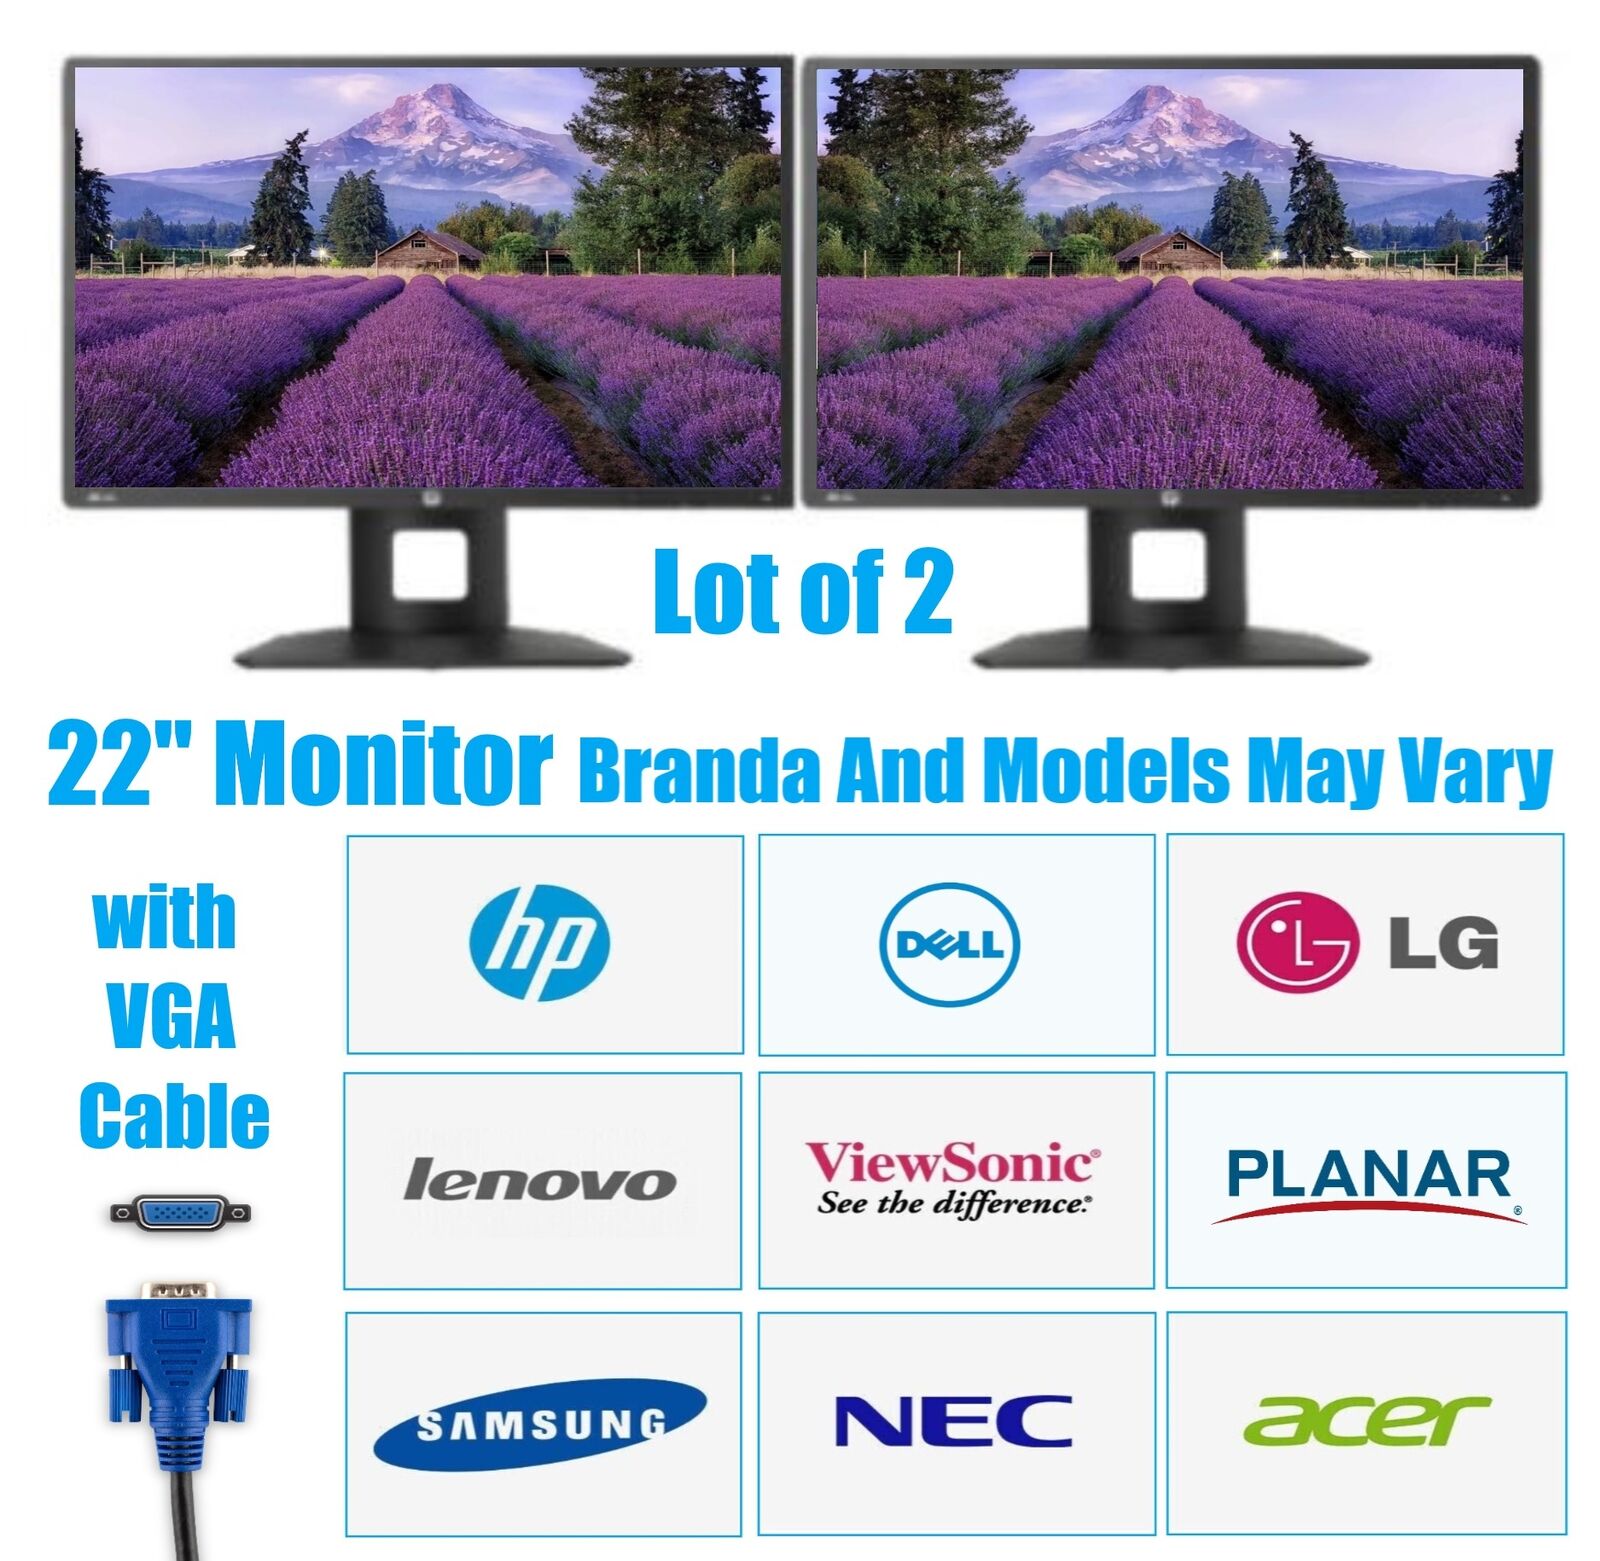 2x 22 inch Large Major FHD 1920x1080p LCD Widescreen Monitors w/Stand VGA Cable